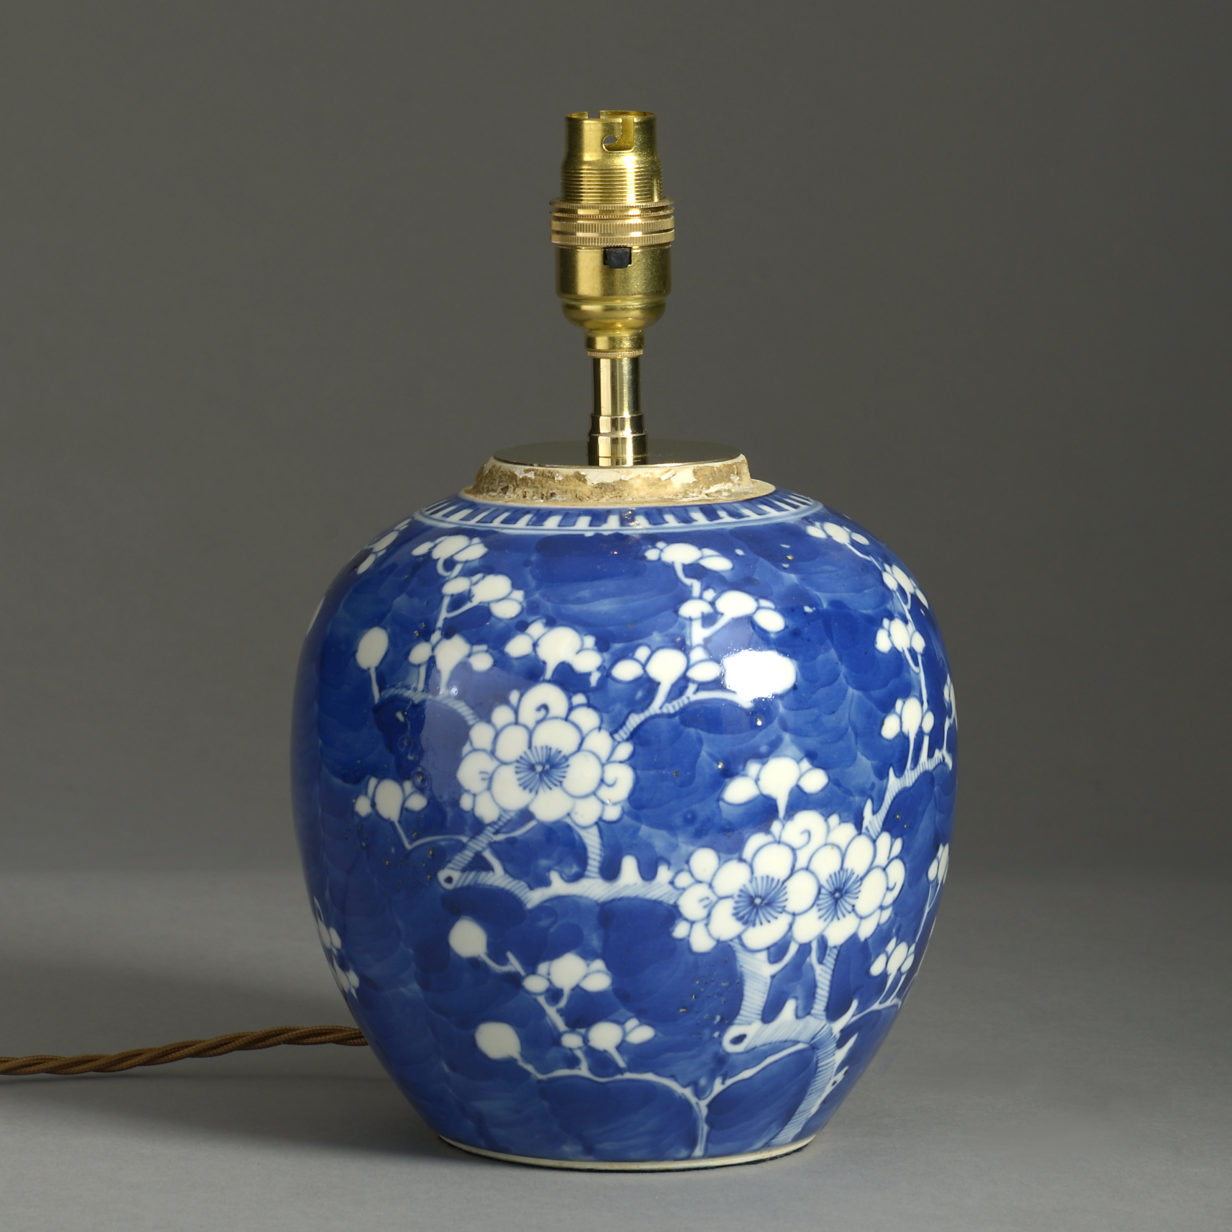 A small scale 19th century blue and white porcelain lamp